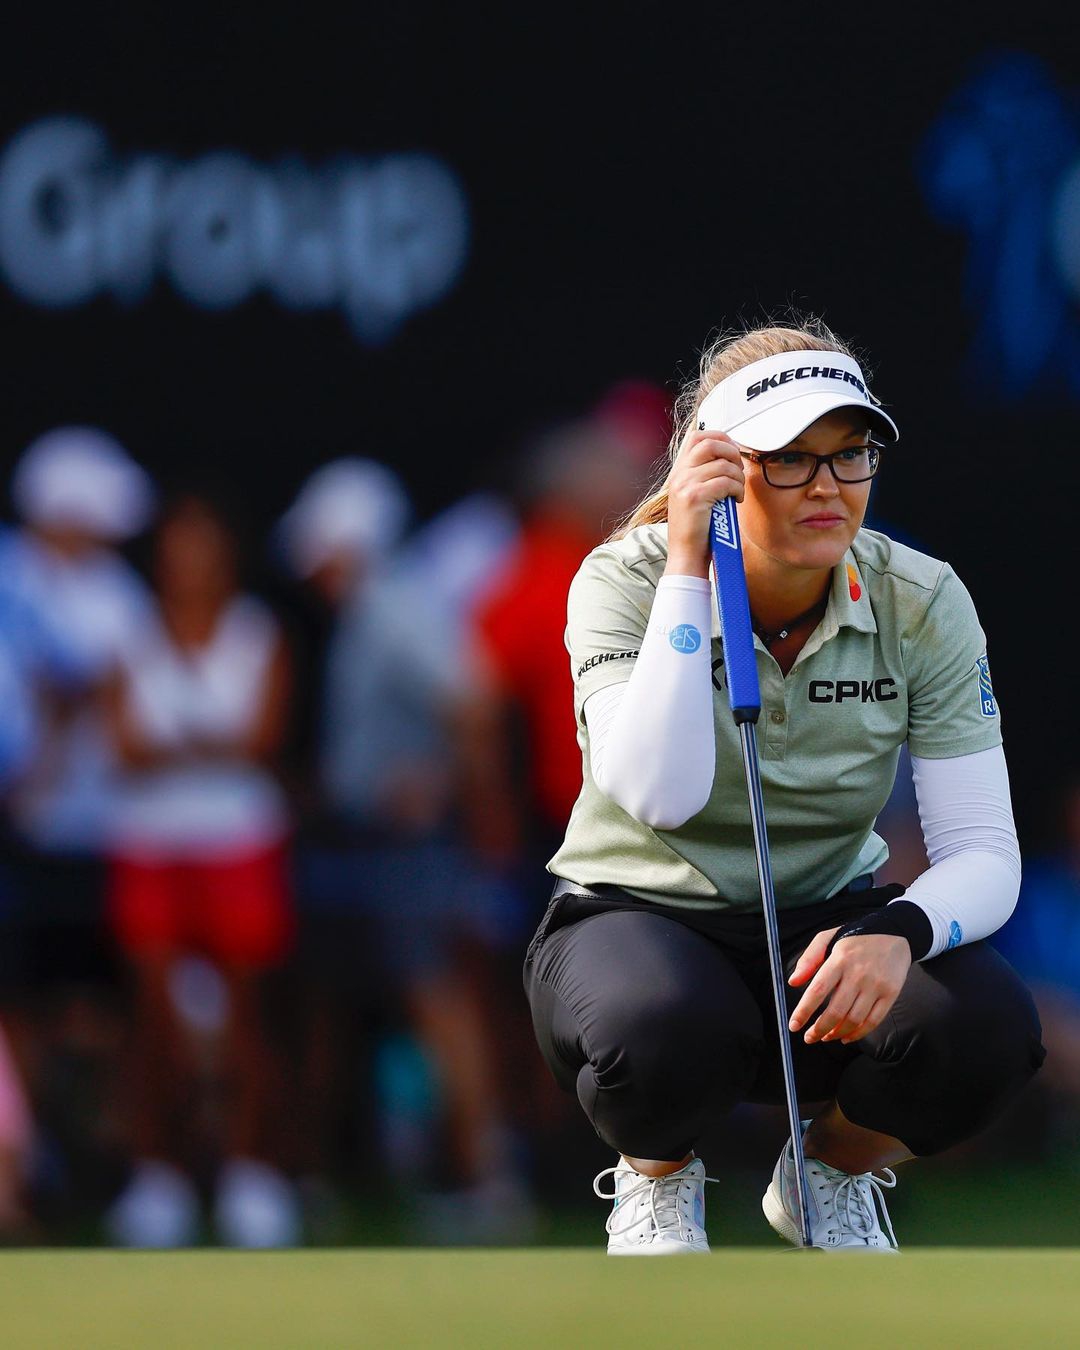 We Love Her, See 10 Amazing Photos of Brooke Henderson – Celeb Campus